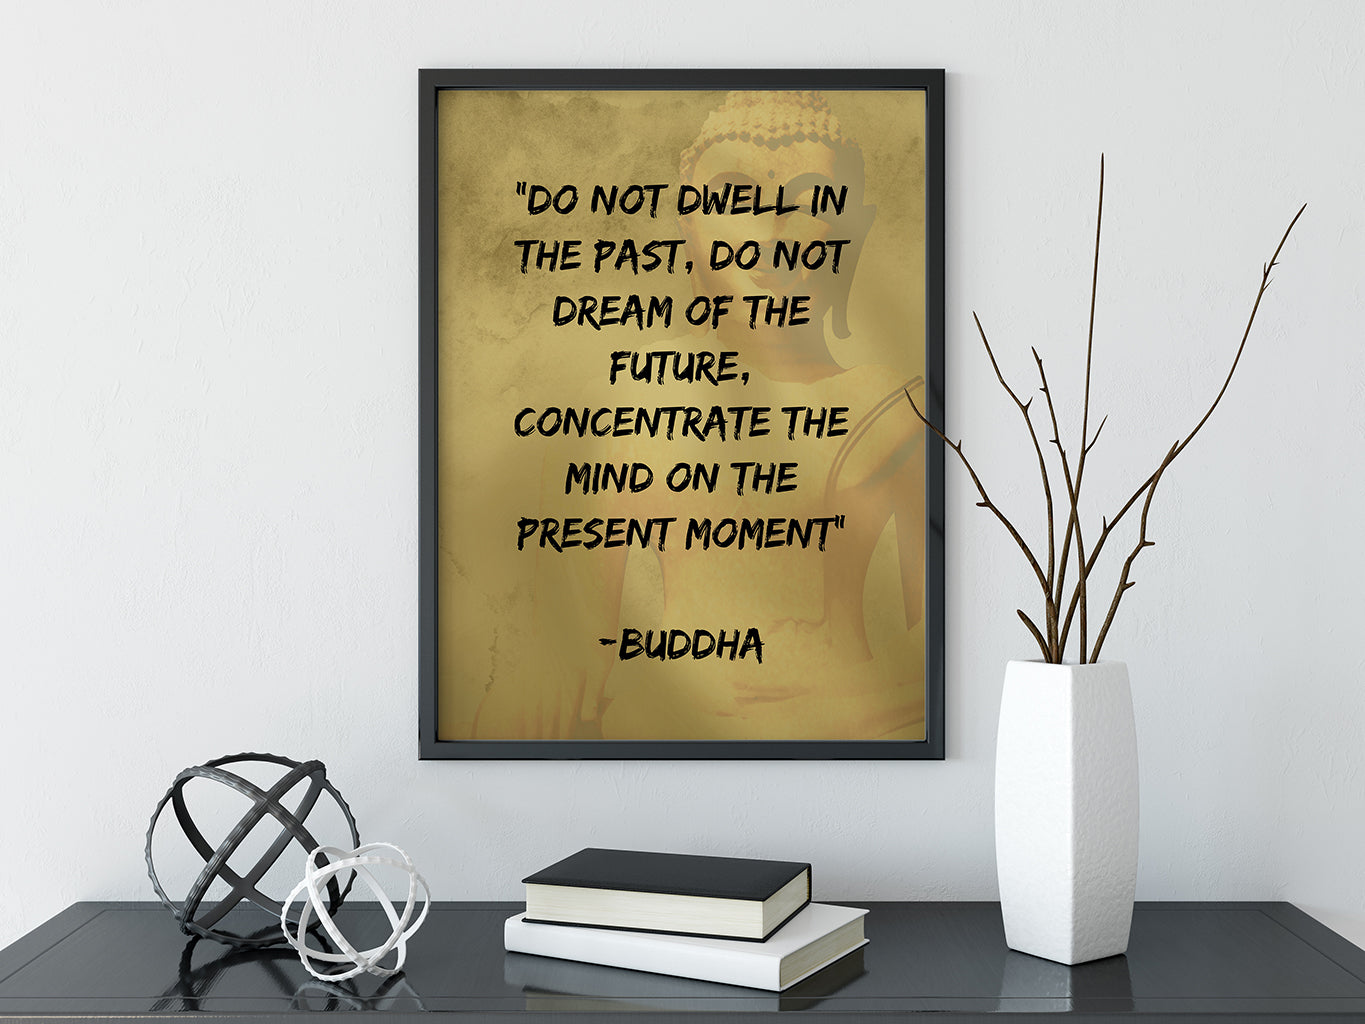 Meditation Wall Art - Buddha - Do Not Dwell In The Past